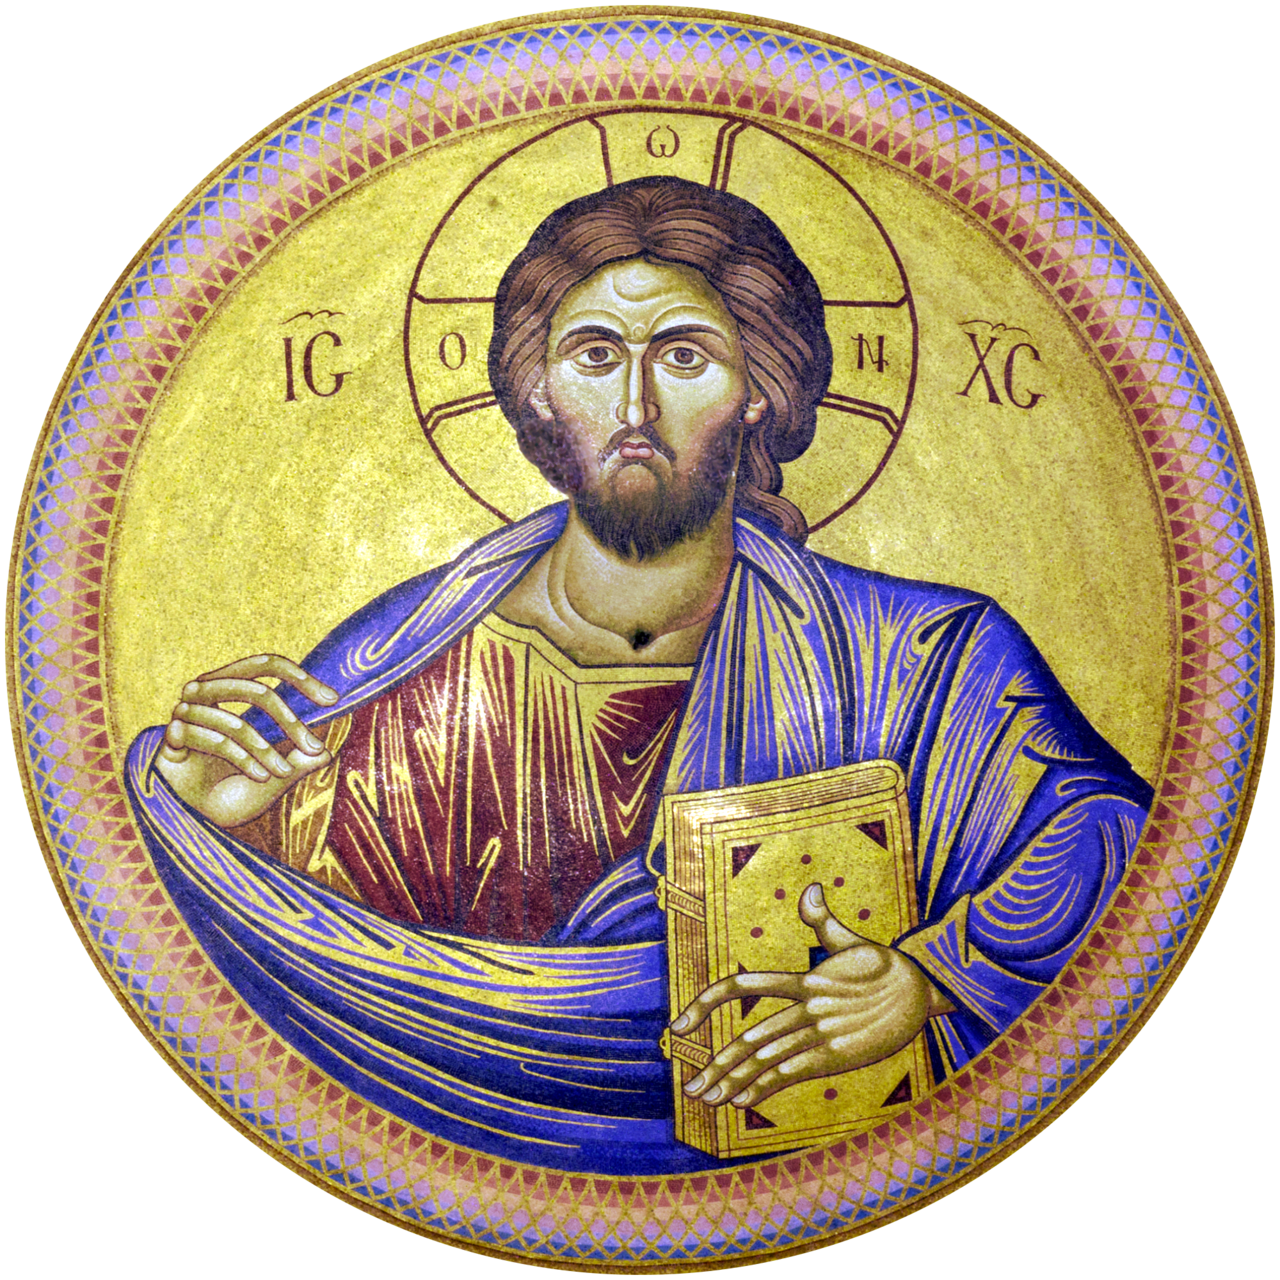 1280px-Christ_Pantocrator,_Church_of_the_Holy_Sepulchre.png